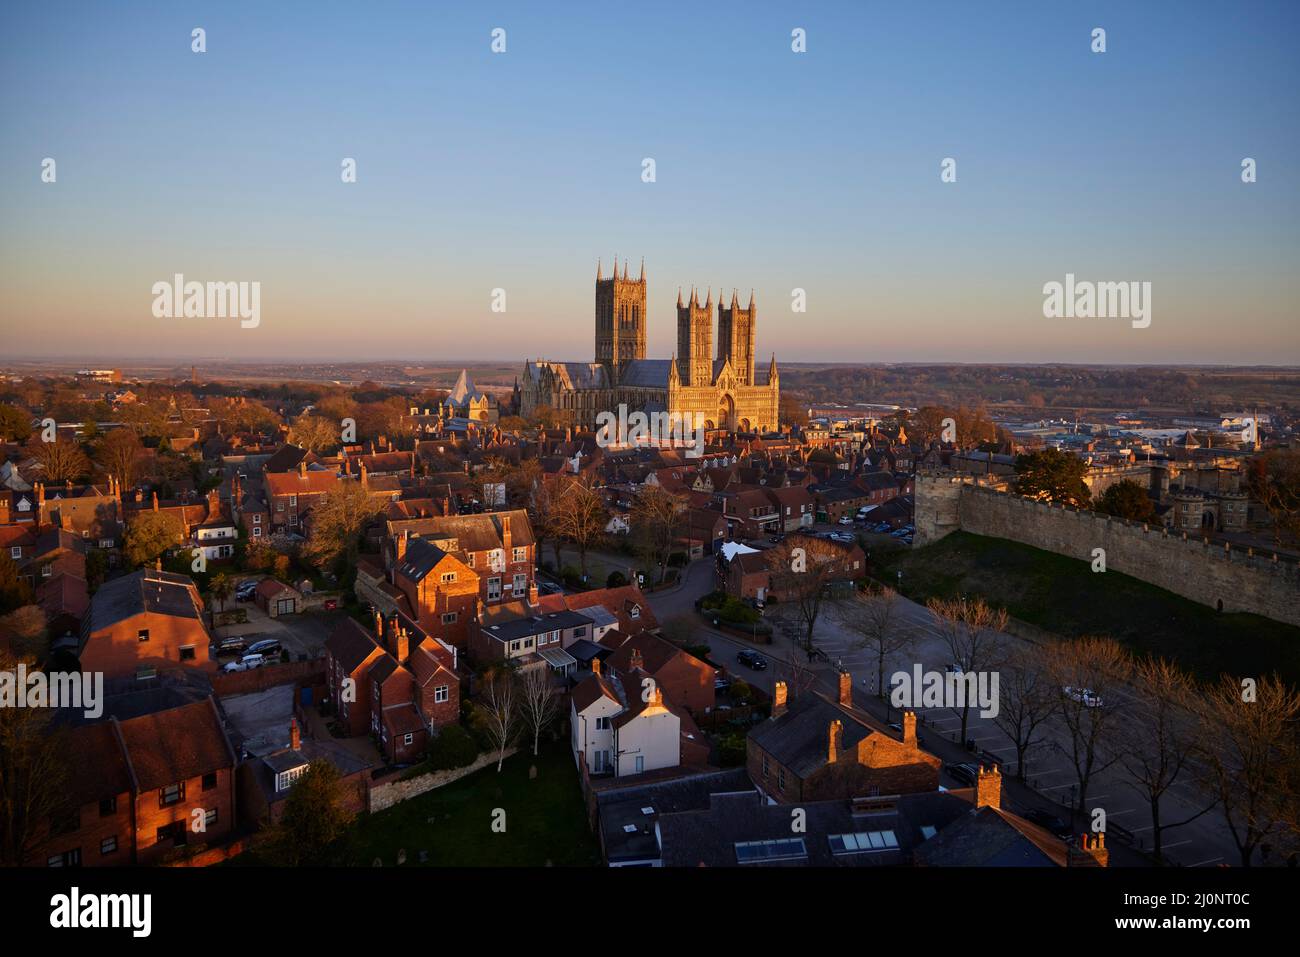 Lincoln Cathedral 2022, Lincoln Minster, or the Cathedral Church of the Blessed Virgin Mary of Lincoln 2022- NO SCAFFOLDING Stock Photo